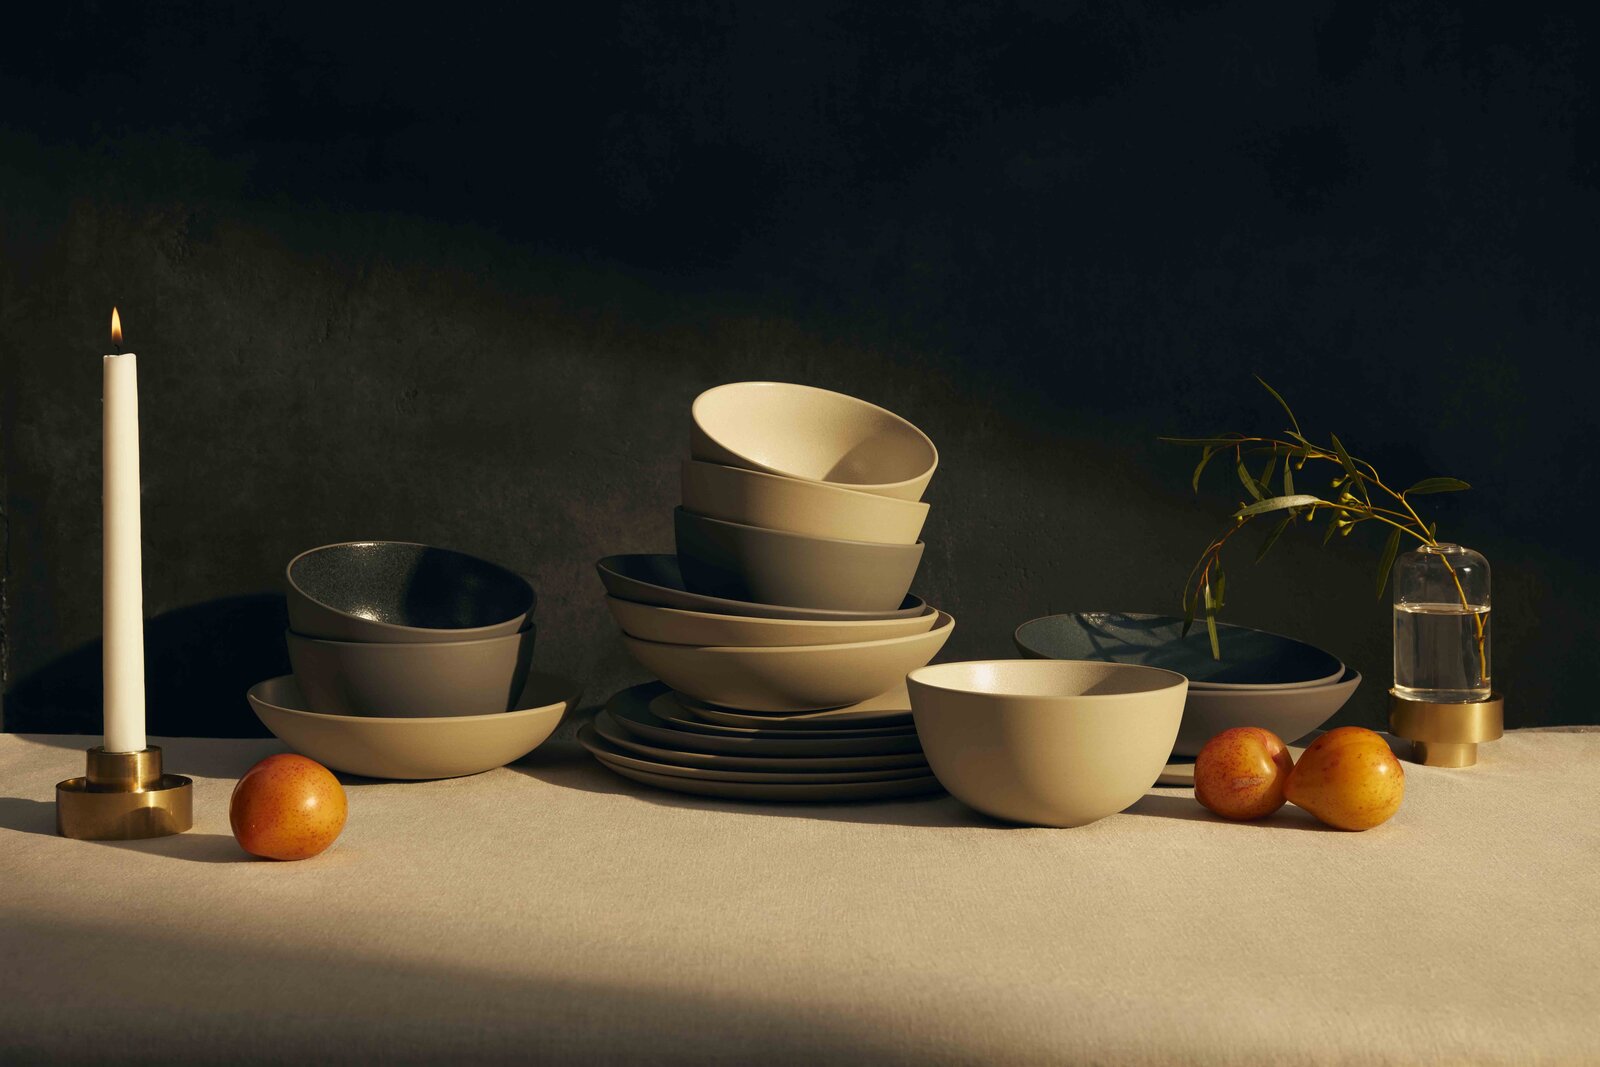 Material Kitchen Just Launched Their First Dinnerware Collection-and It’s a Mood